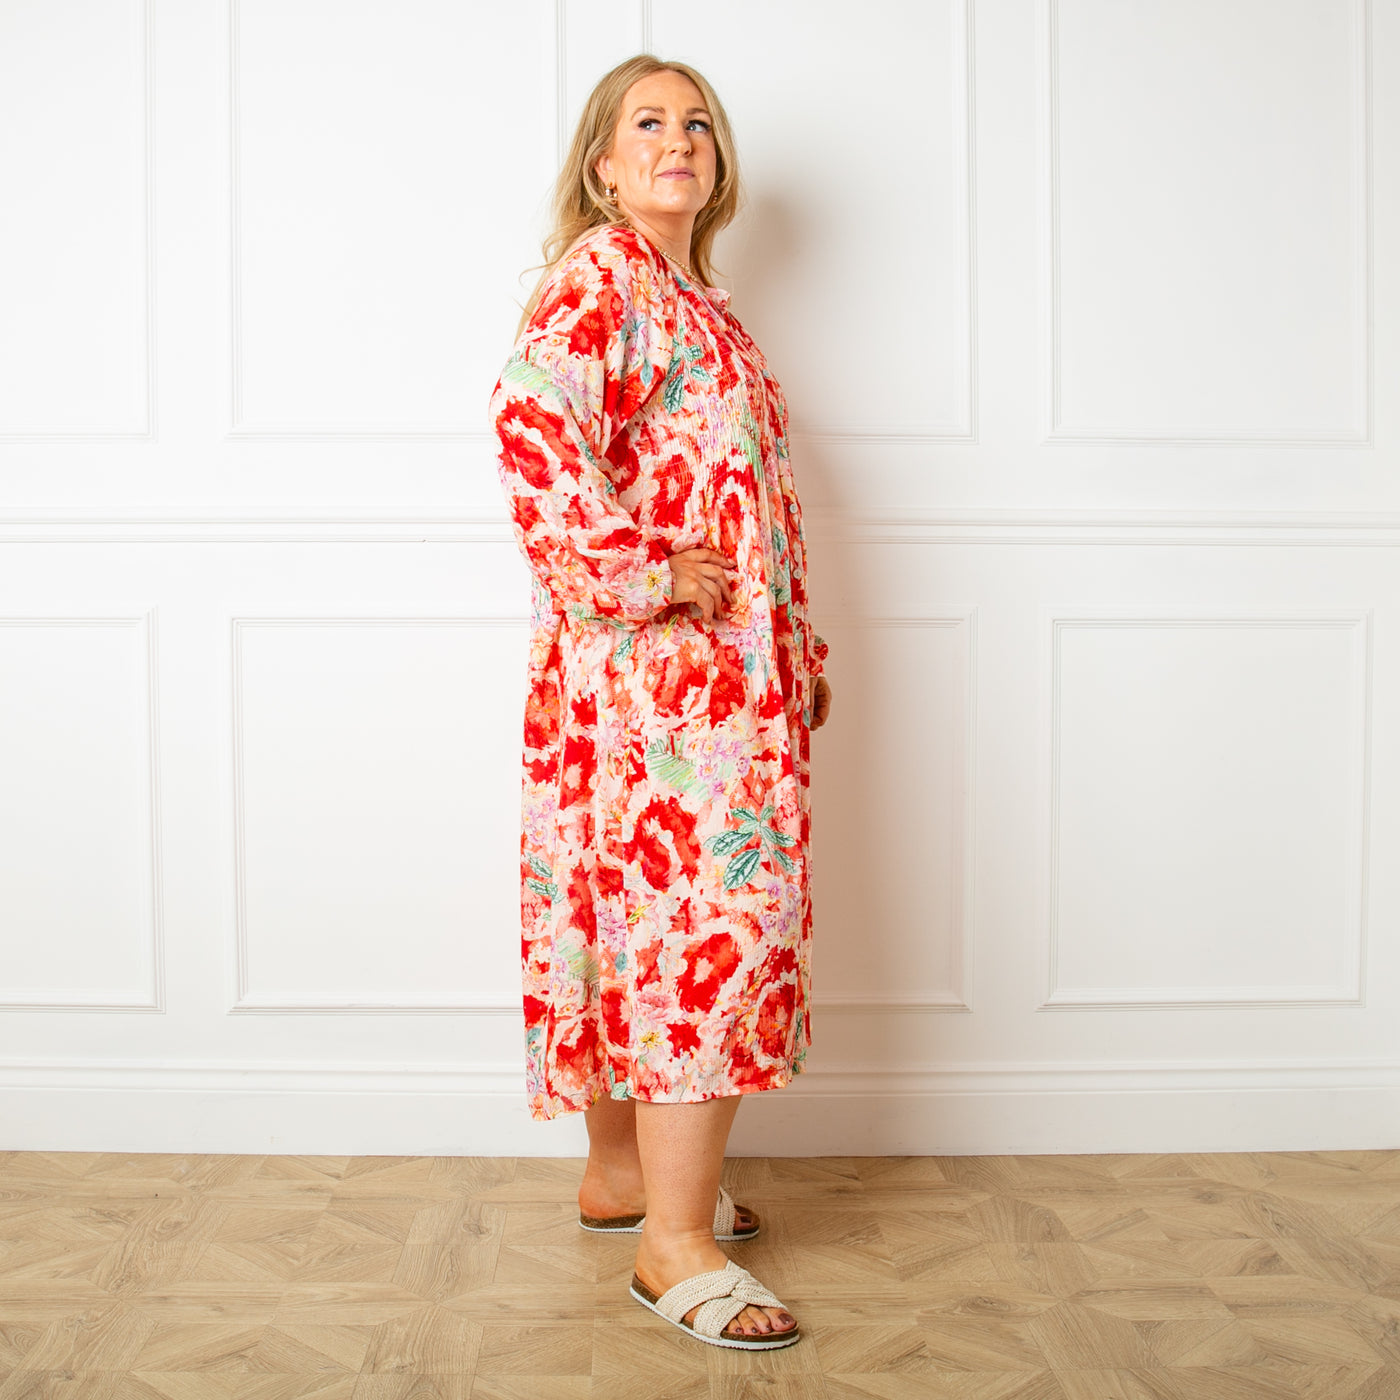 The red Wild Garden Maxi Dress made from a lightweight viscose material in a beautiful detailed floral print pattern